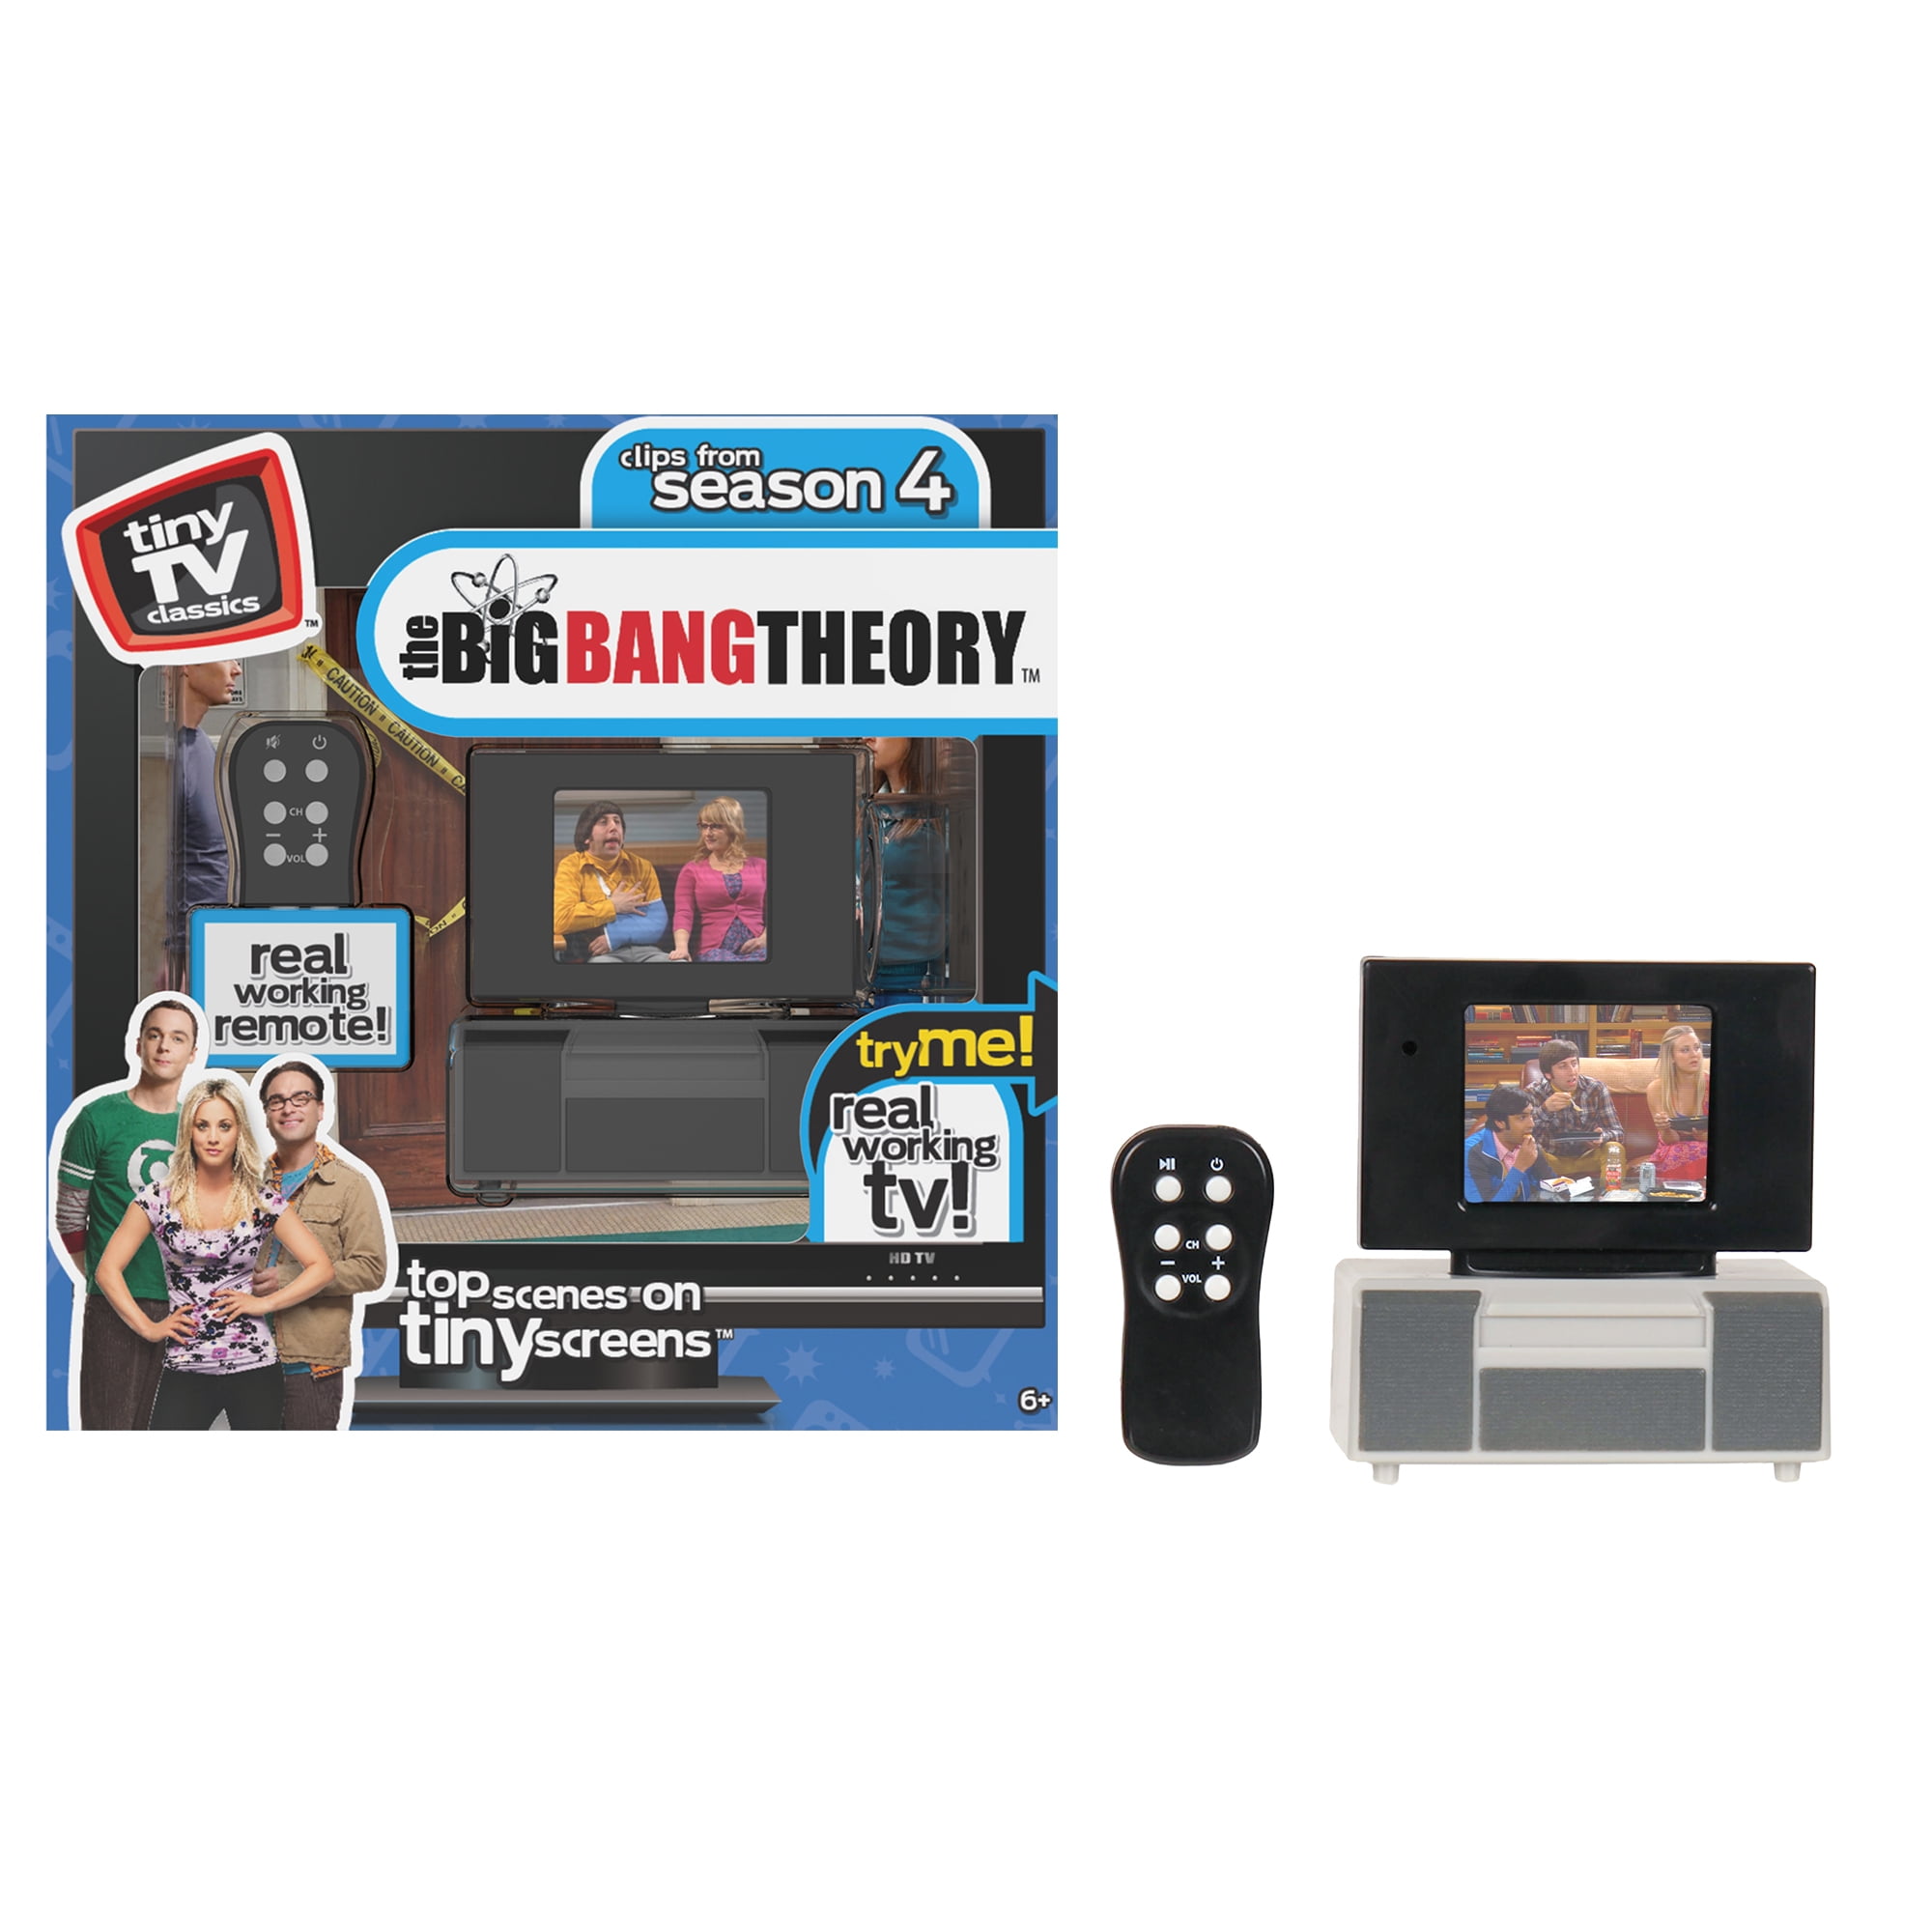 Tiny TV Classics - The Big Bang Theory Edition - Collectible Toy - Watch Top Big Bang Theory Scenes on a Real-Working Tiny TV with Working Remote pic pic